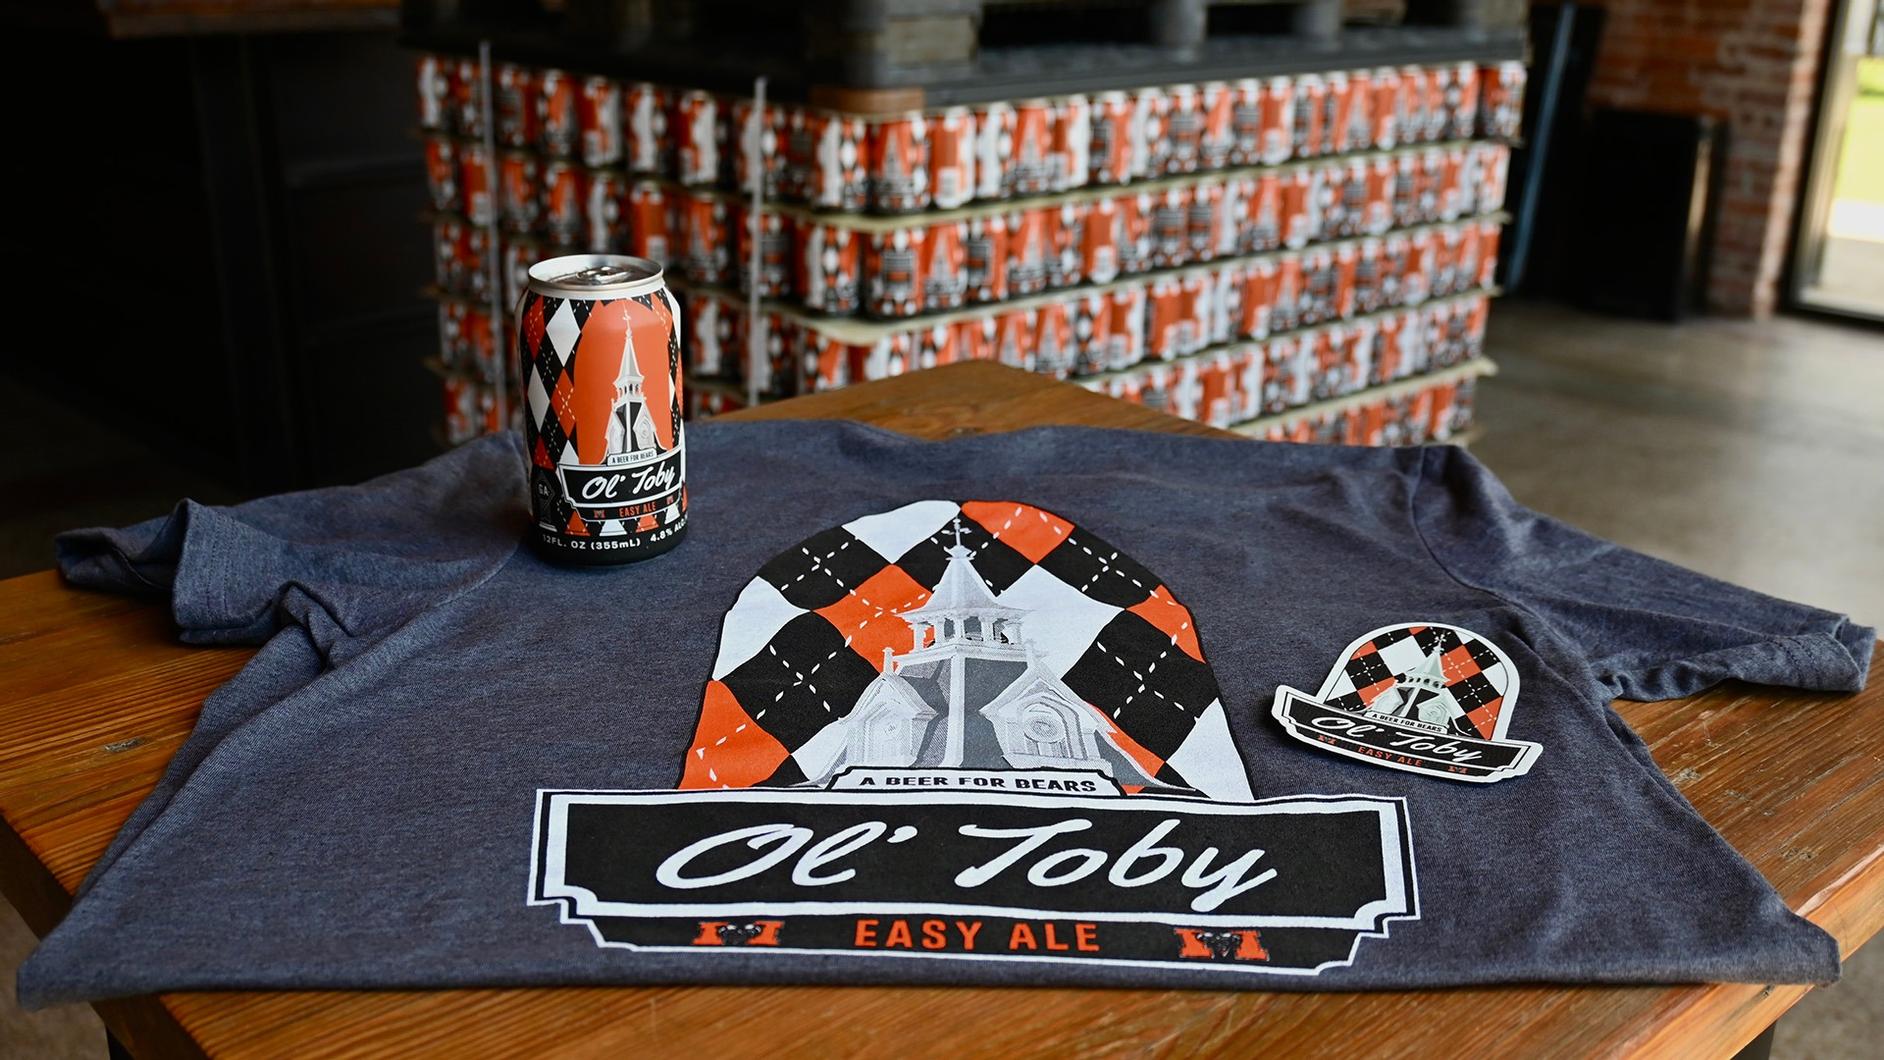 Fall Line to debut Ol\' Toby Easy Ale on Sept. 9 | 